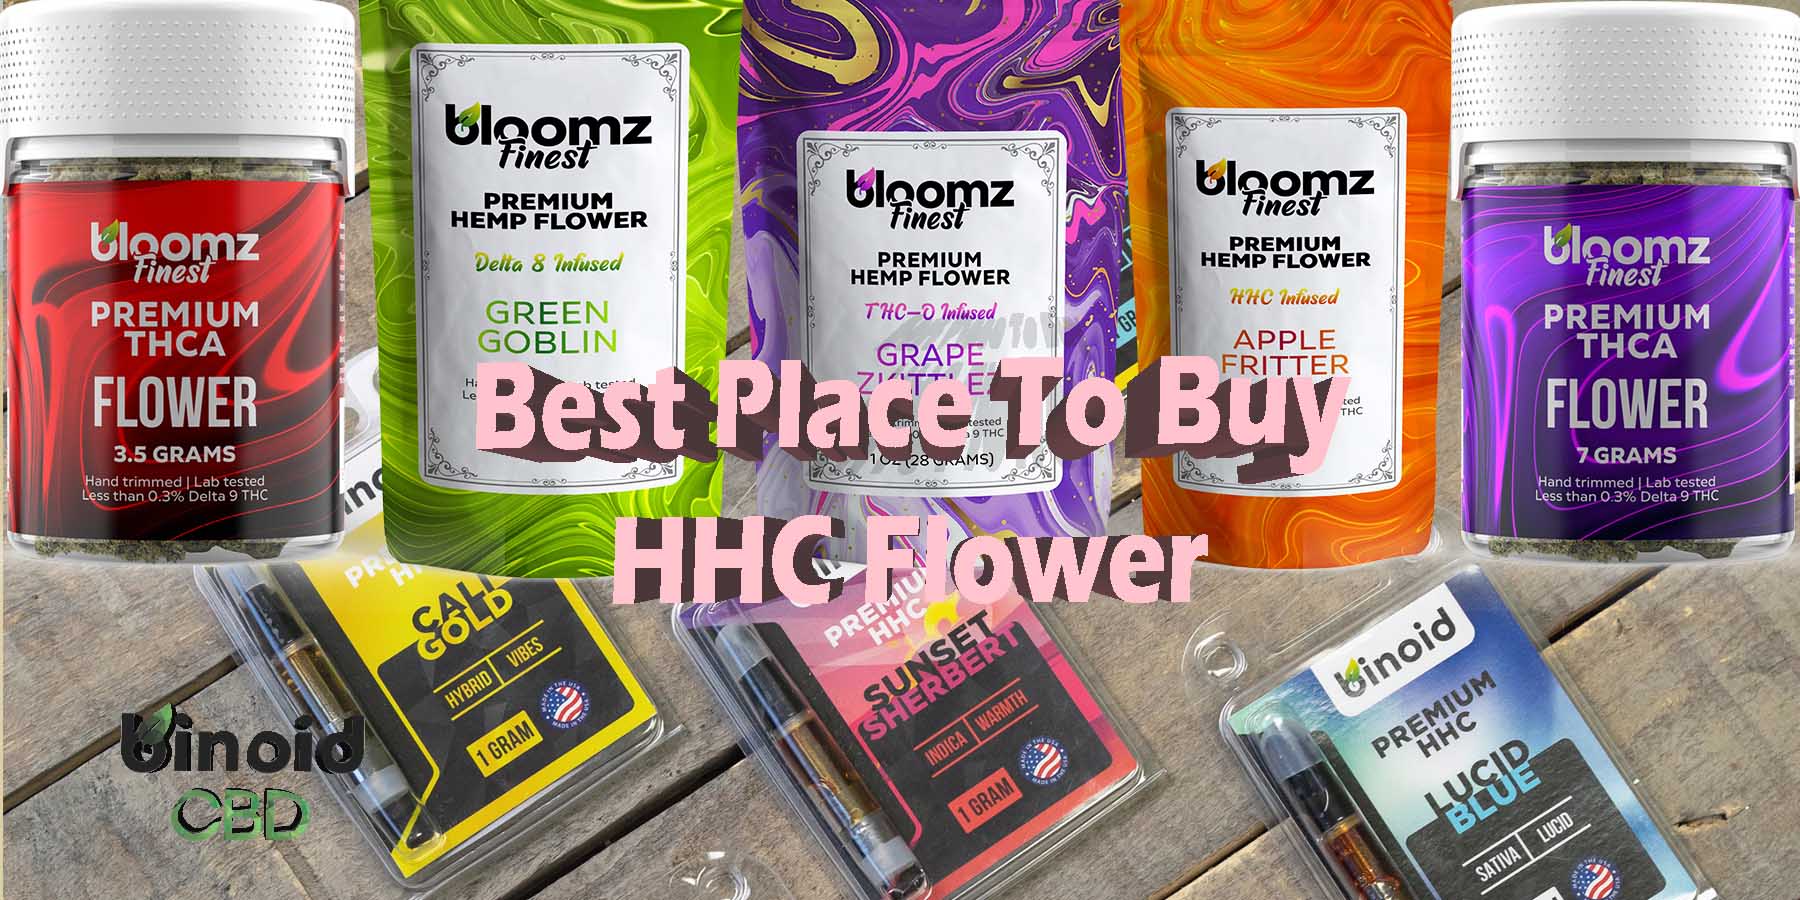 Best Place To Buy HHC Flower Pre-Rolls Where To Get Near Me Best Place-Lowest Price Coupon Discount Strongest Brand Bloomz